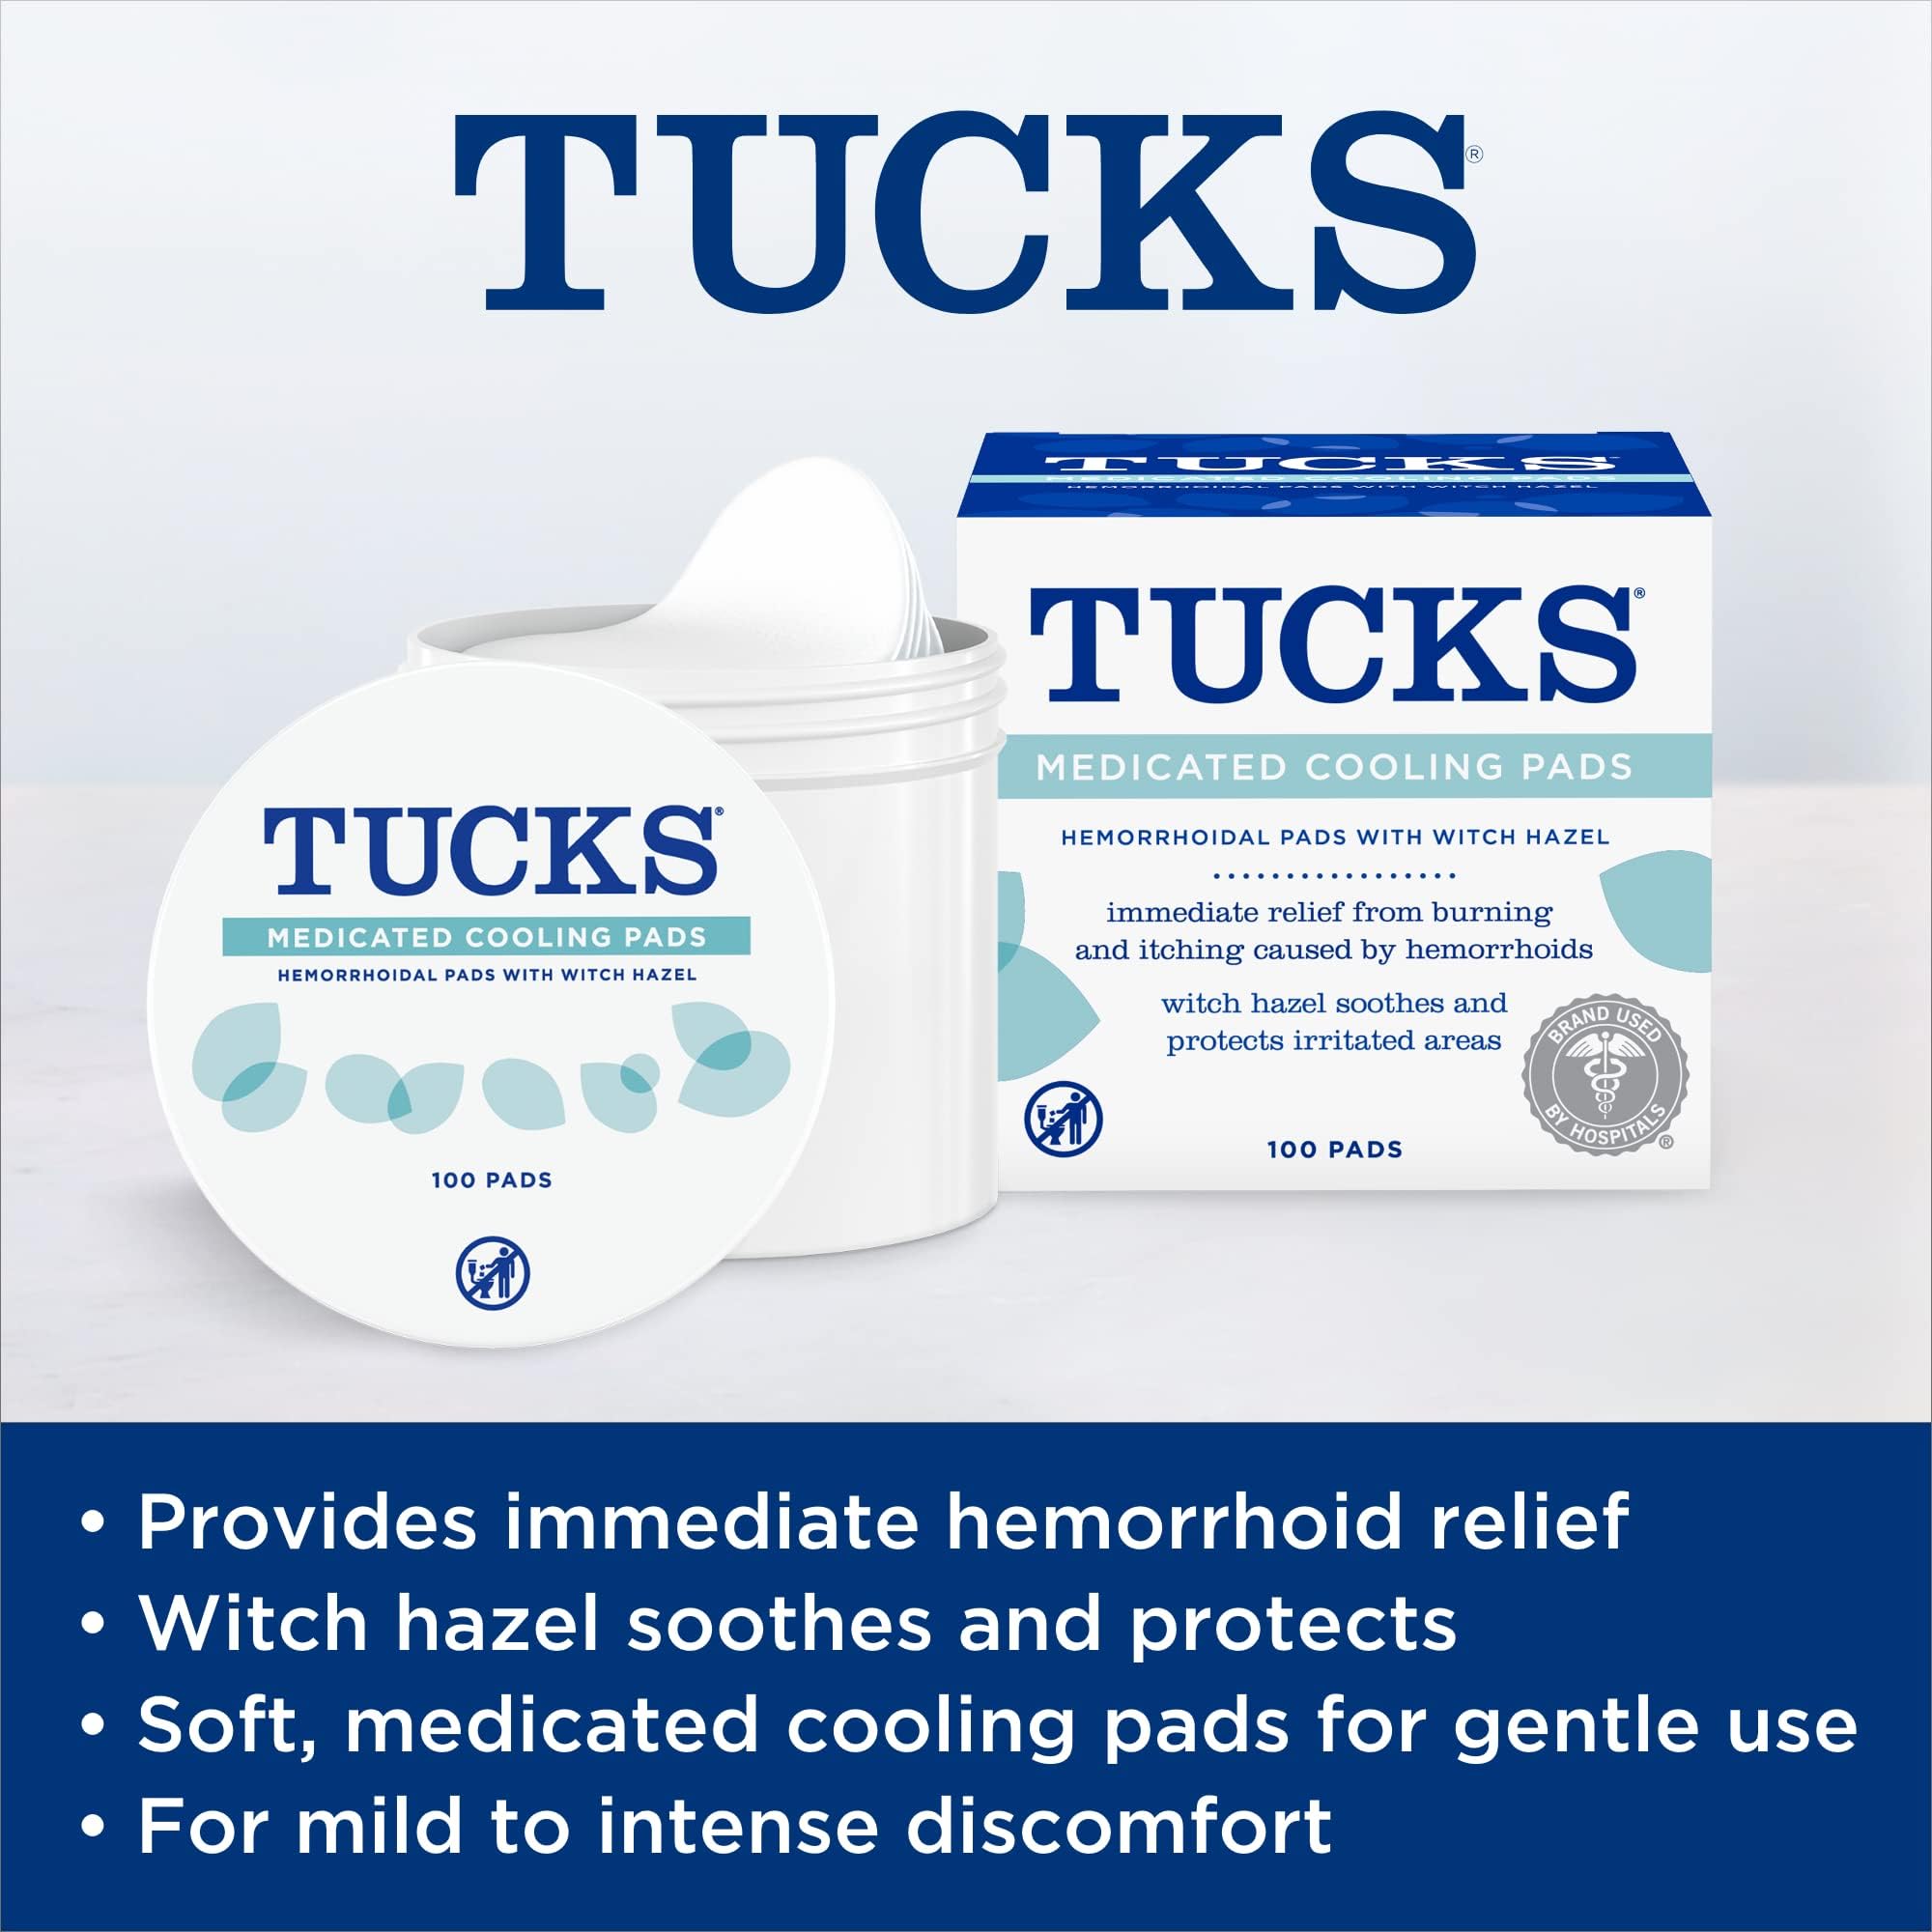 TUCKS Medicated Cooling Pads, 100 Count – Hemorrhoid Pads with Witch Hazel, Cleanses Sensitive Areas, Protects from Irritation, Hemorrhoid Treatment, Medicated Pads Used By Hospitals